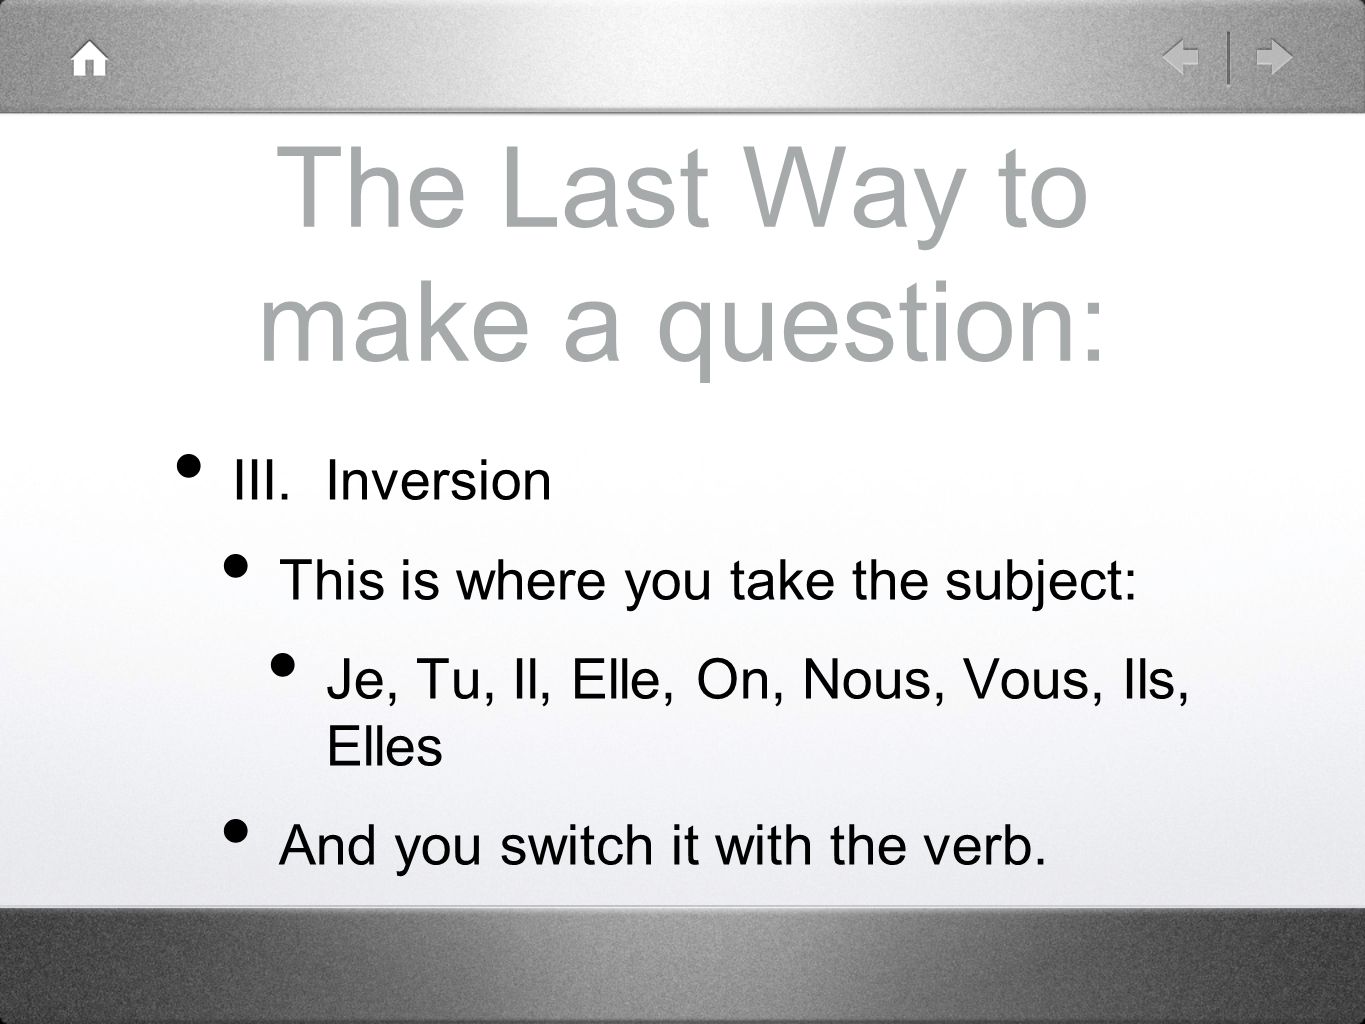 The Last Way to make a question: III.